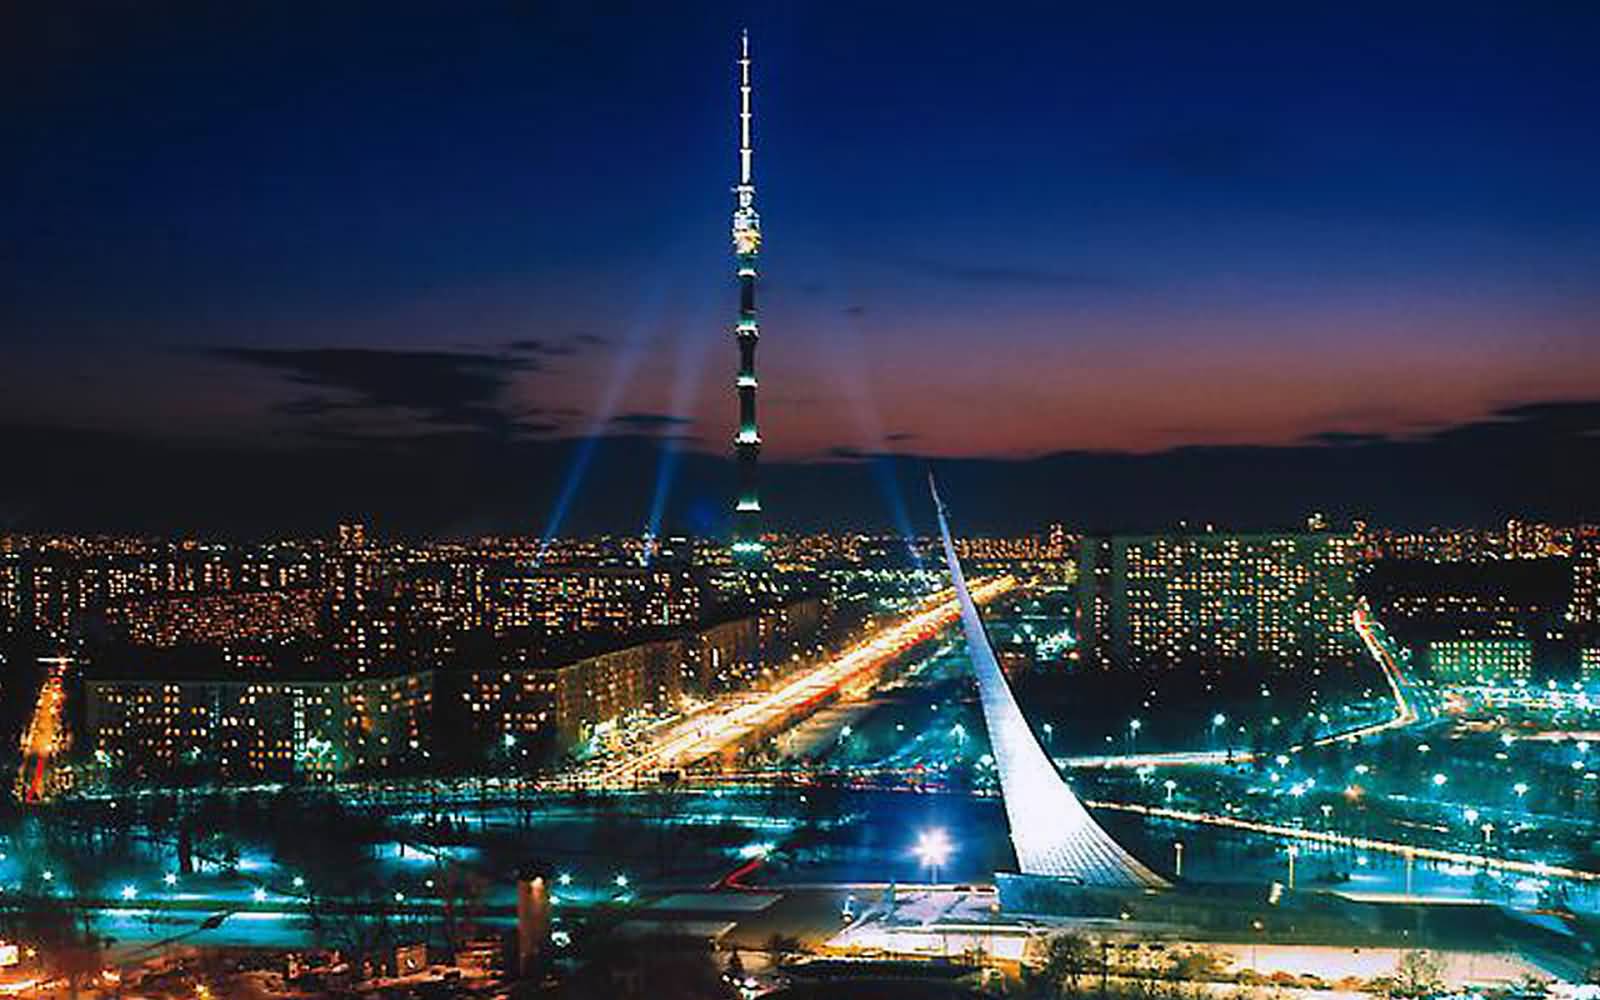 Moscow City And Ostankino Tower At Night